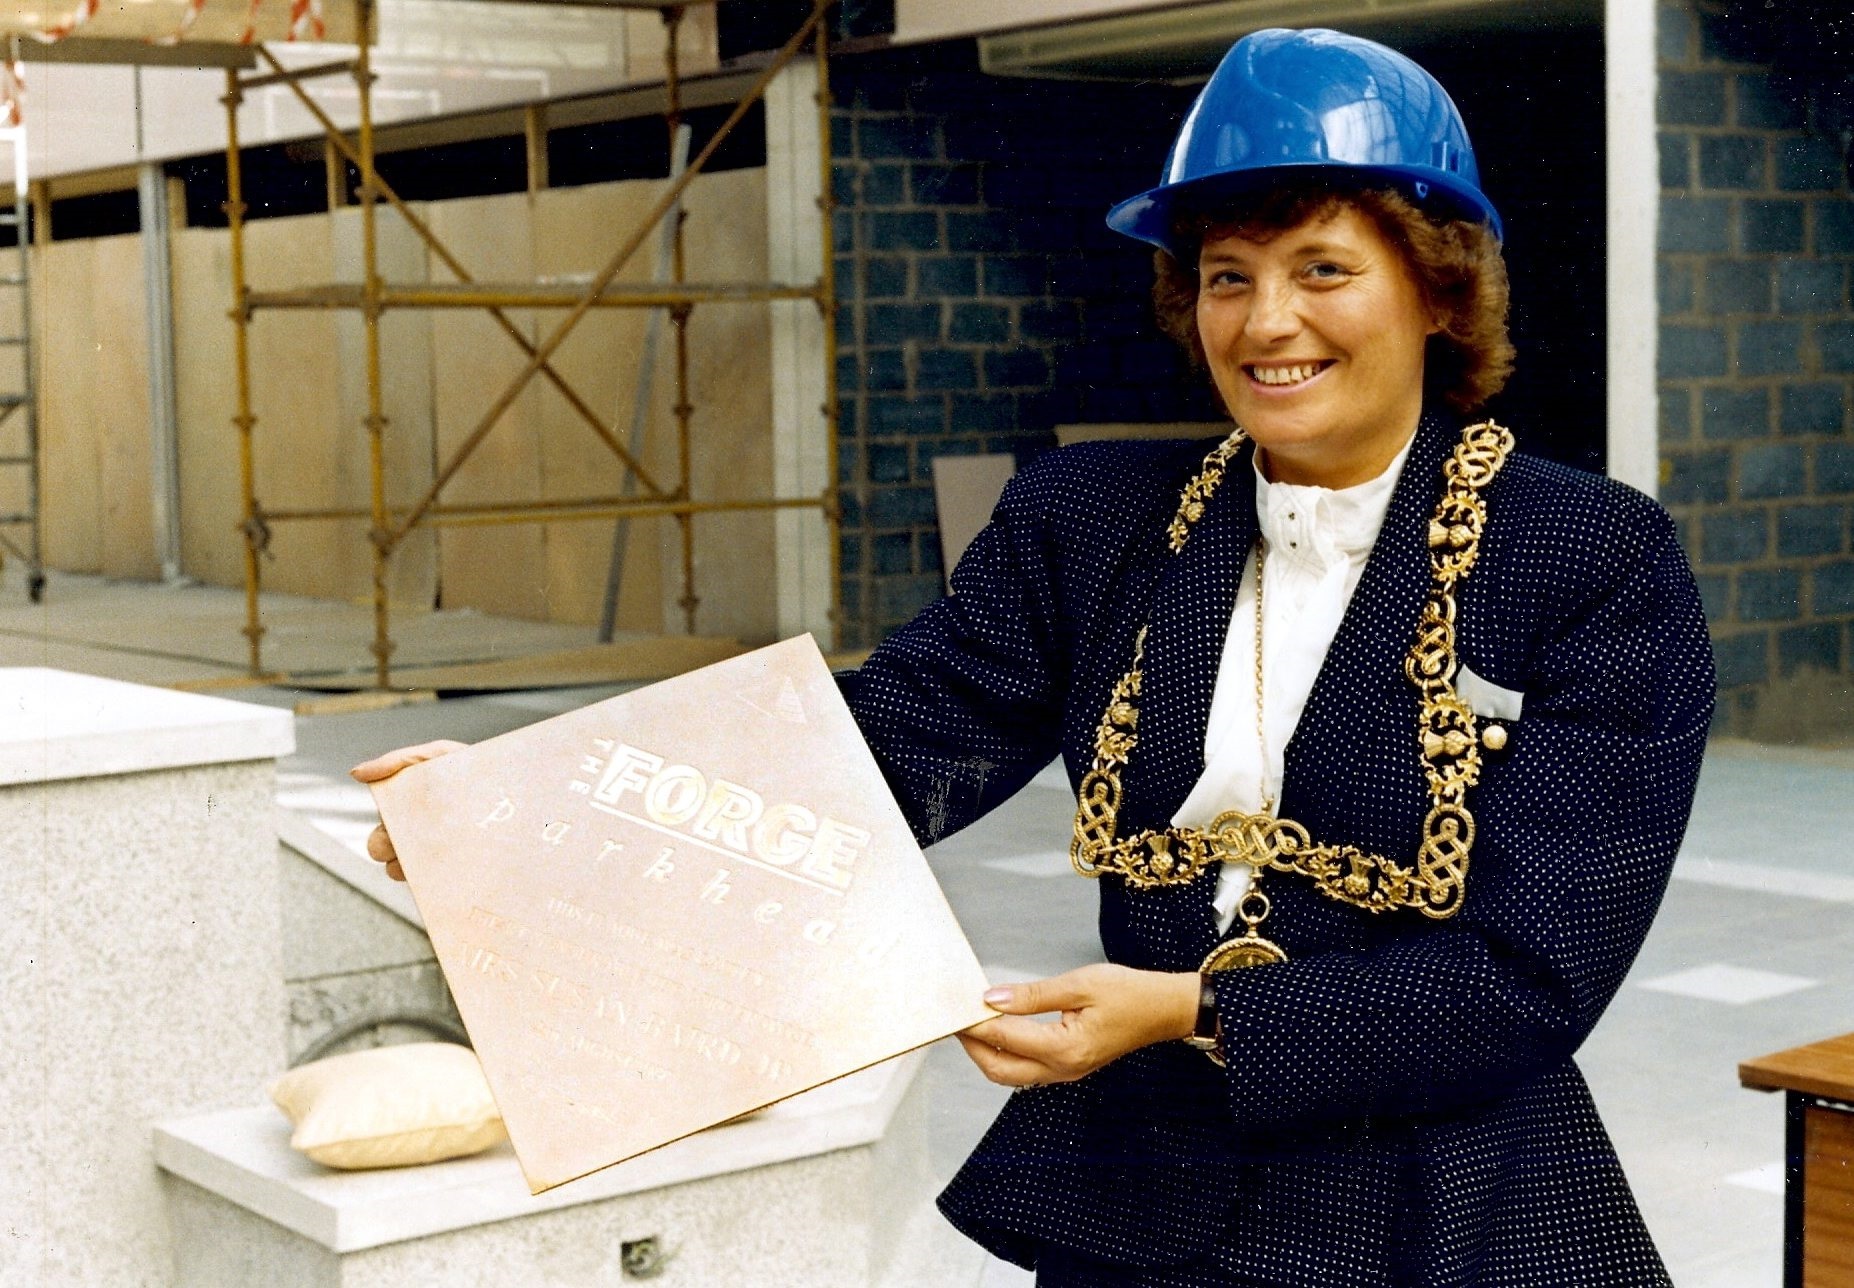 Lord Provost Susan Baird at the Parhead Forge August 1988